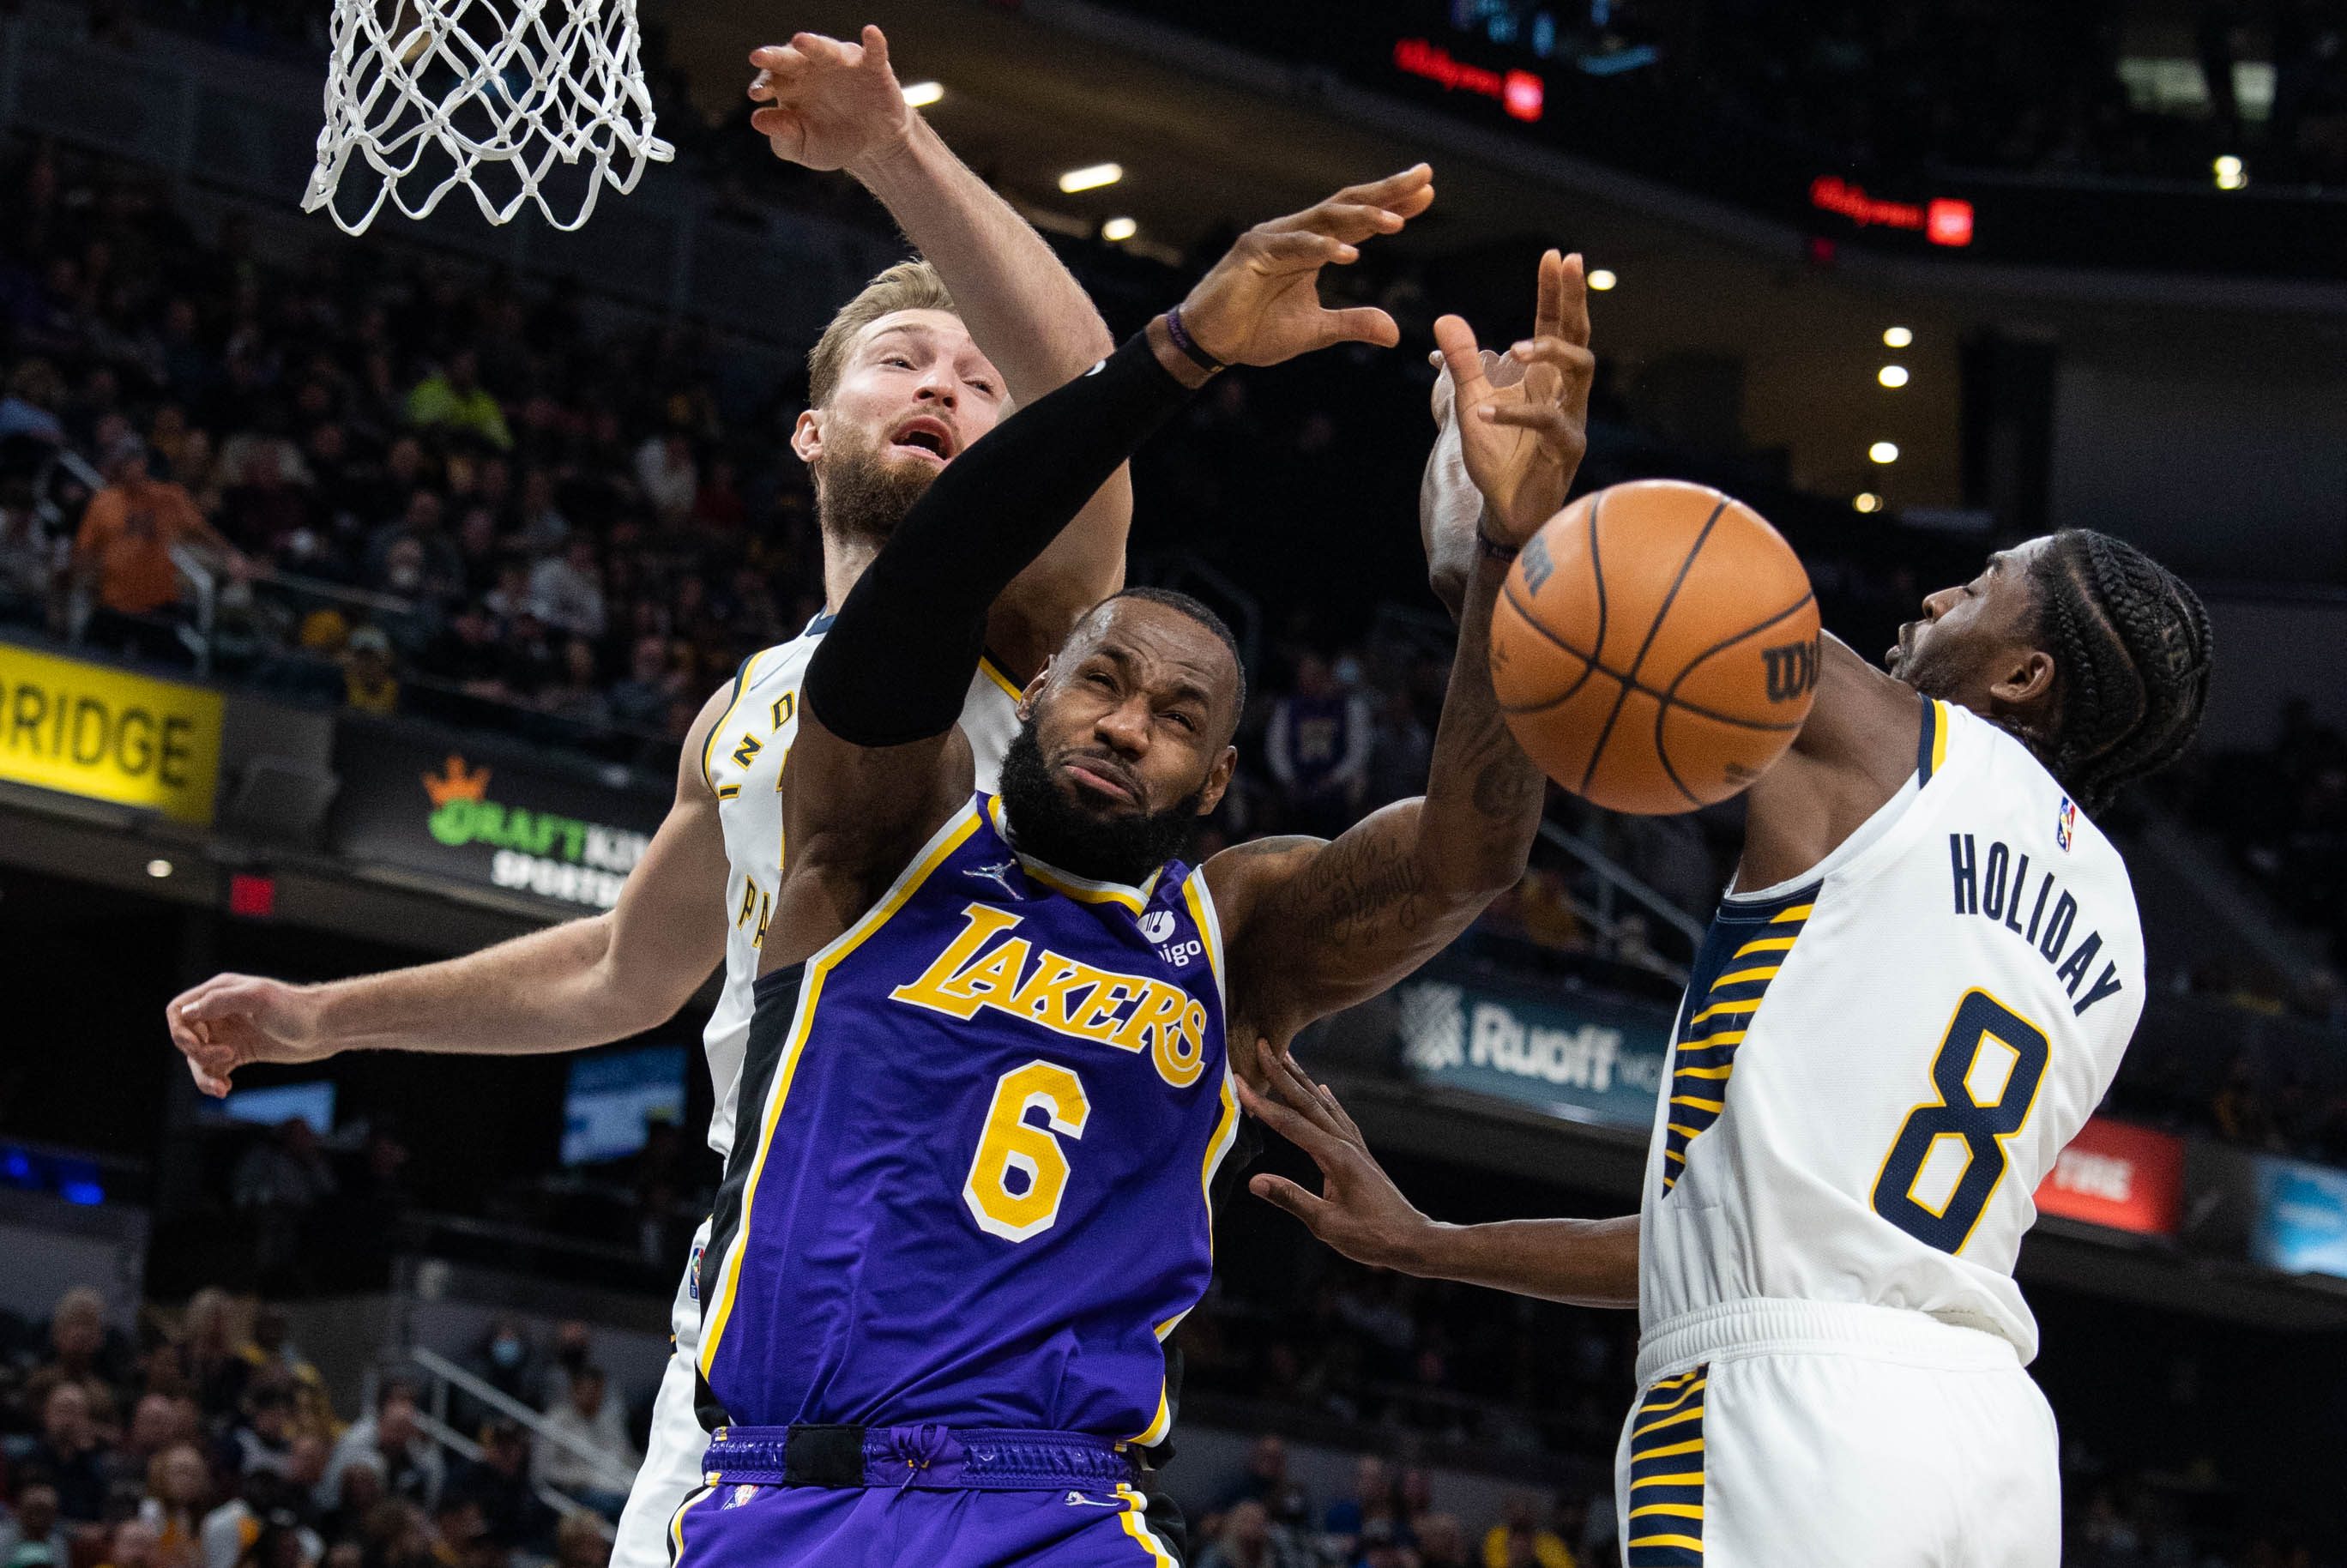 LeBron scores season-high 39 as Lakers escape Pacers in OT